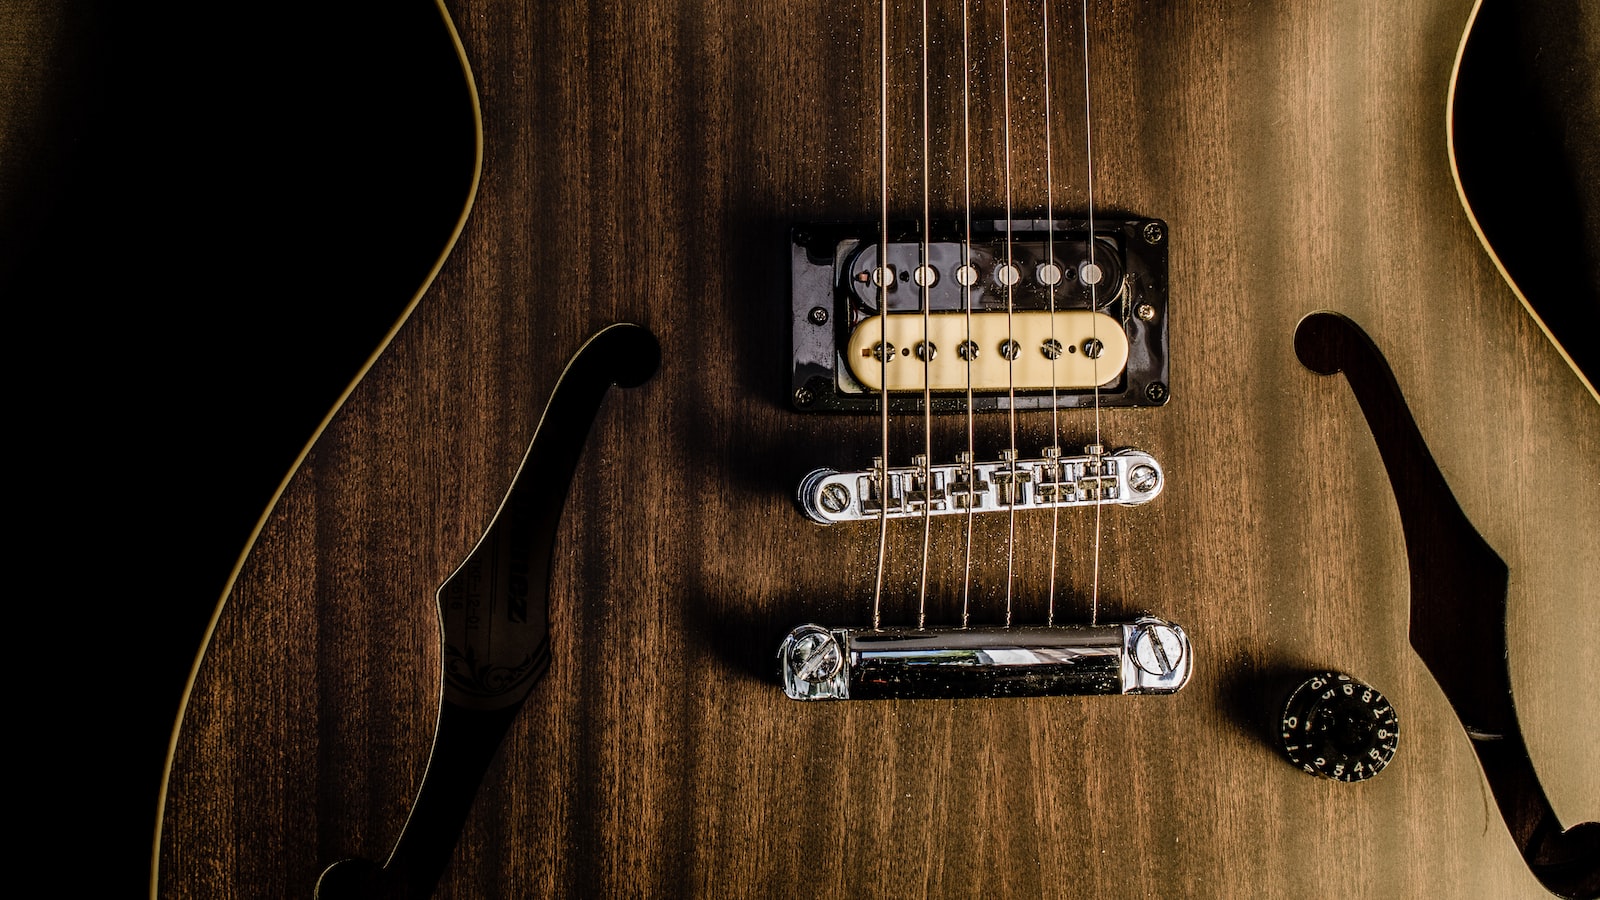 Choosing the Right Guitar: Exploring Different Types and Finding Your Fit